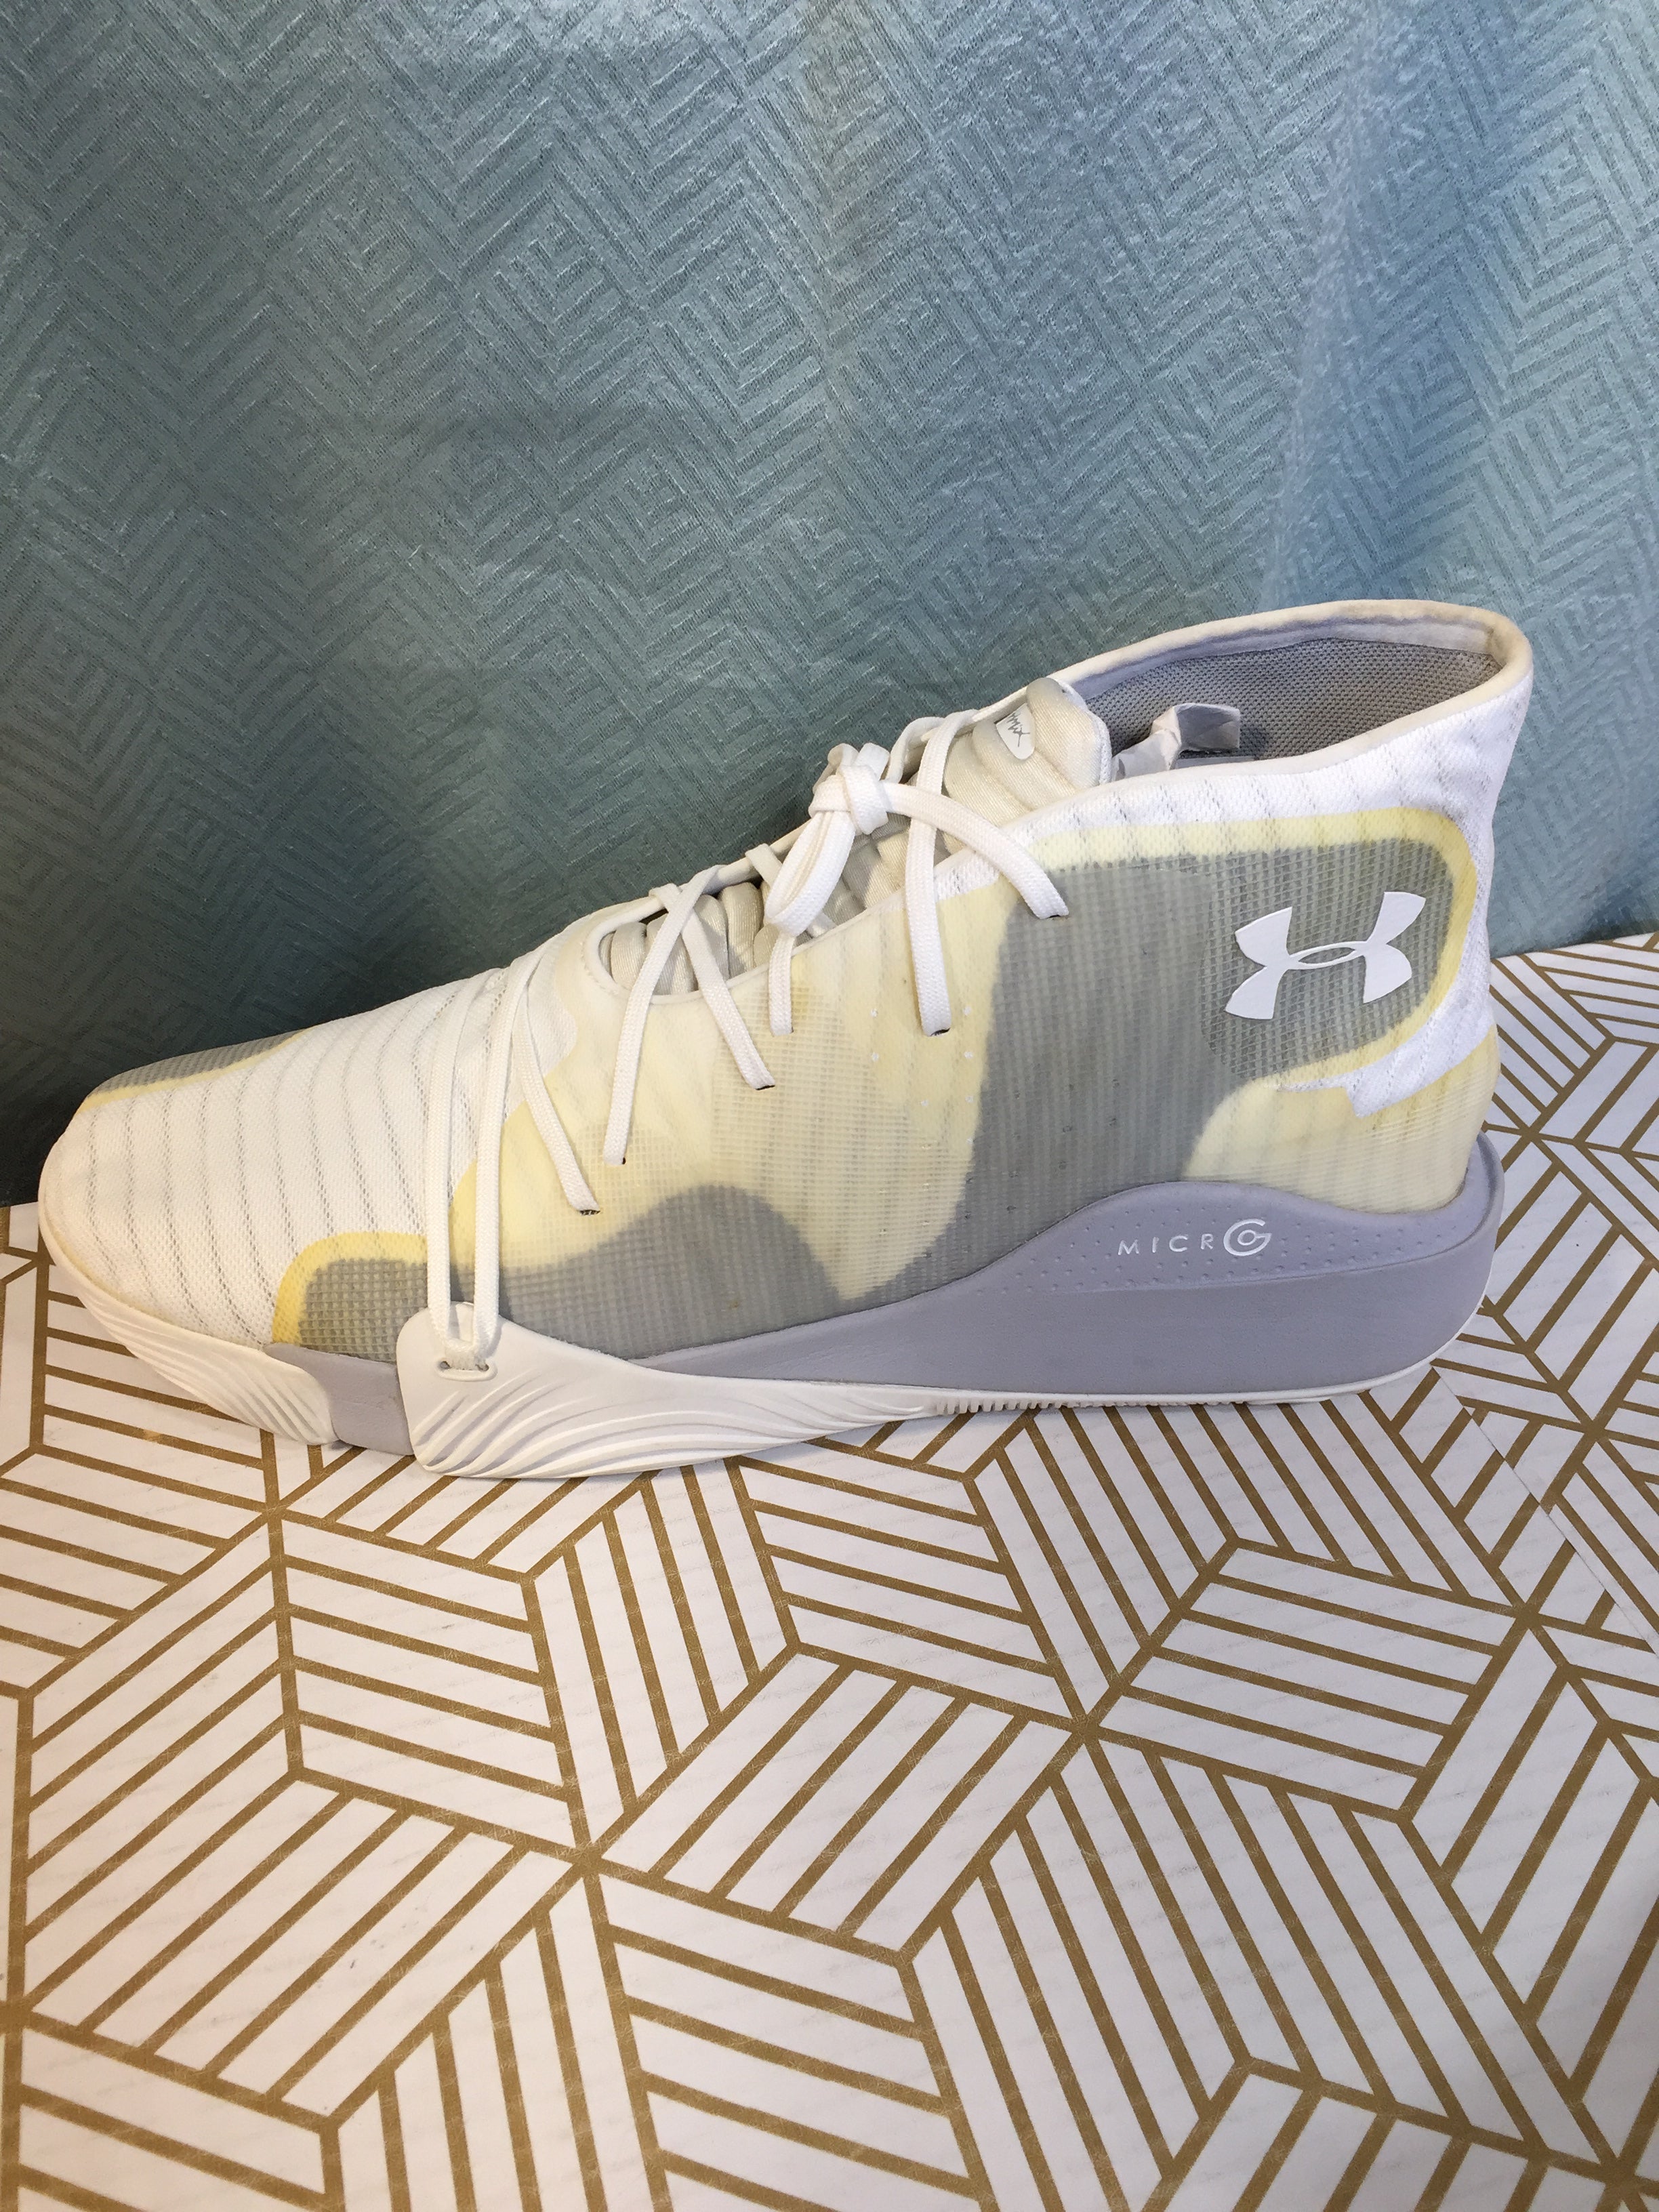 Under Armour Men's Spawn Mid Basketball Shoe Size 20 (7760502587630)